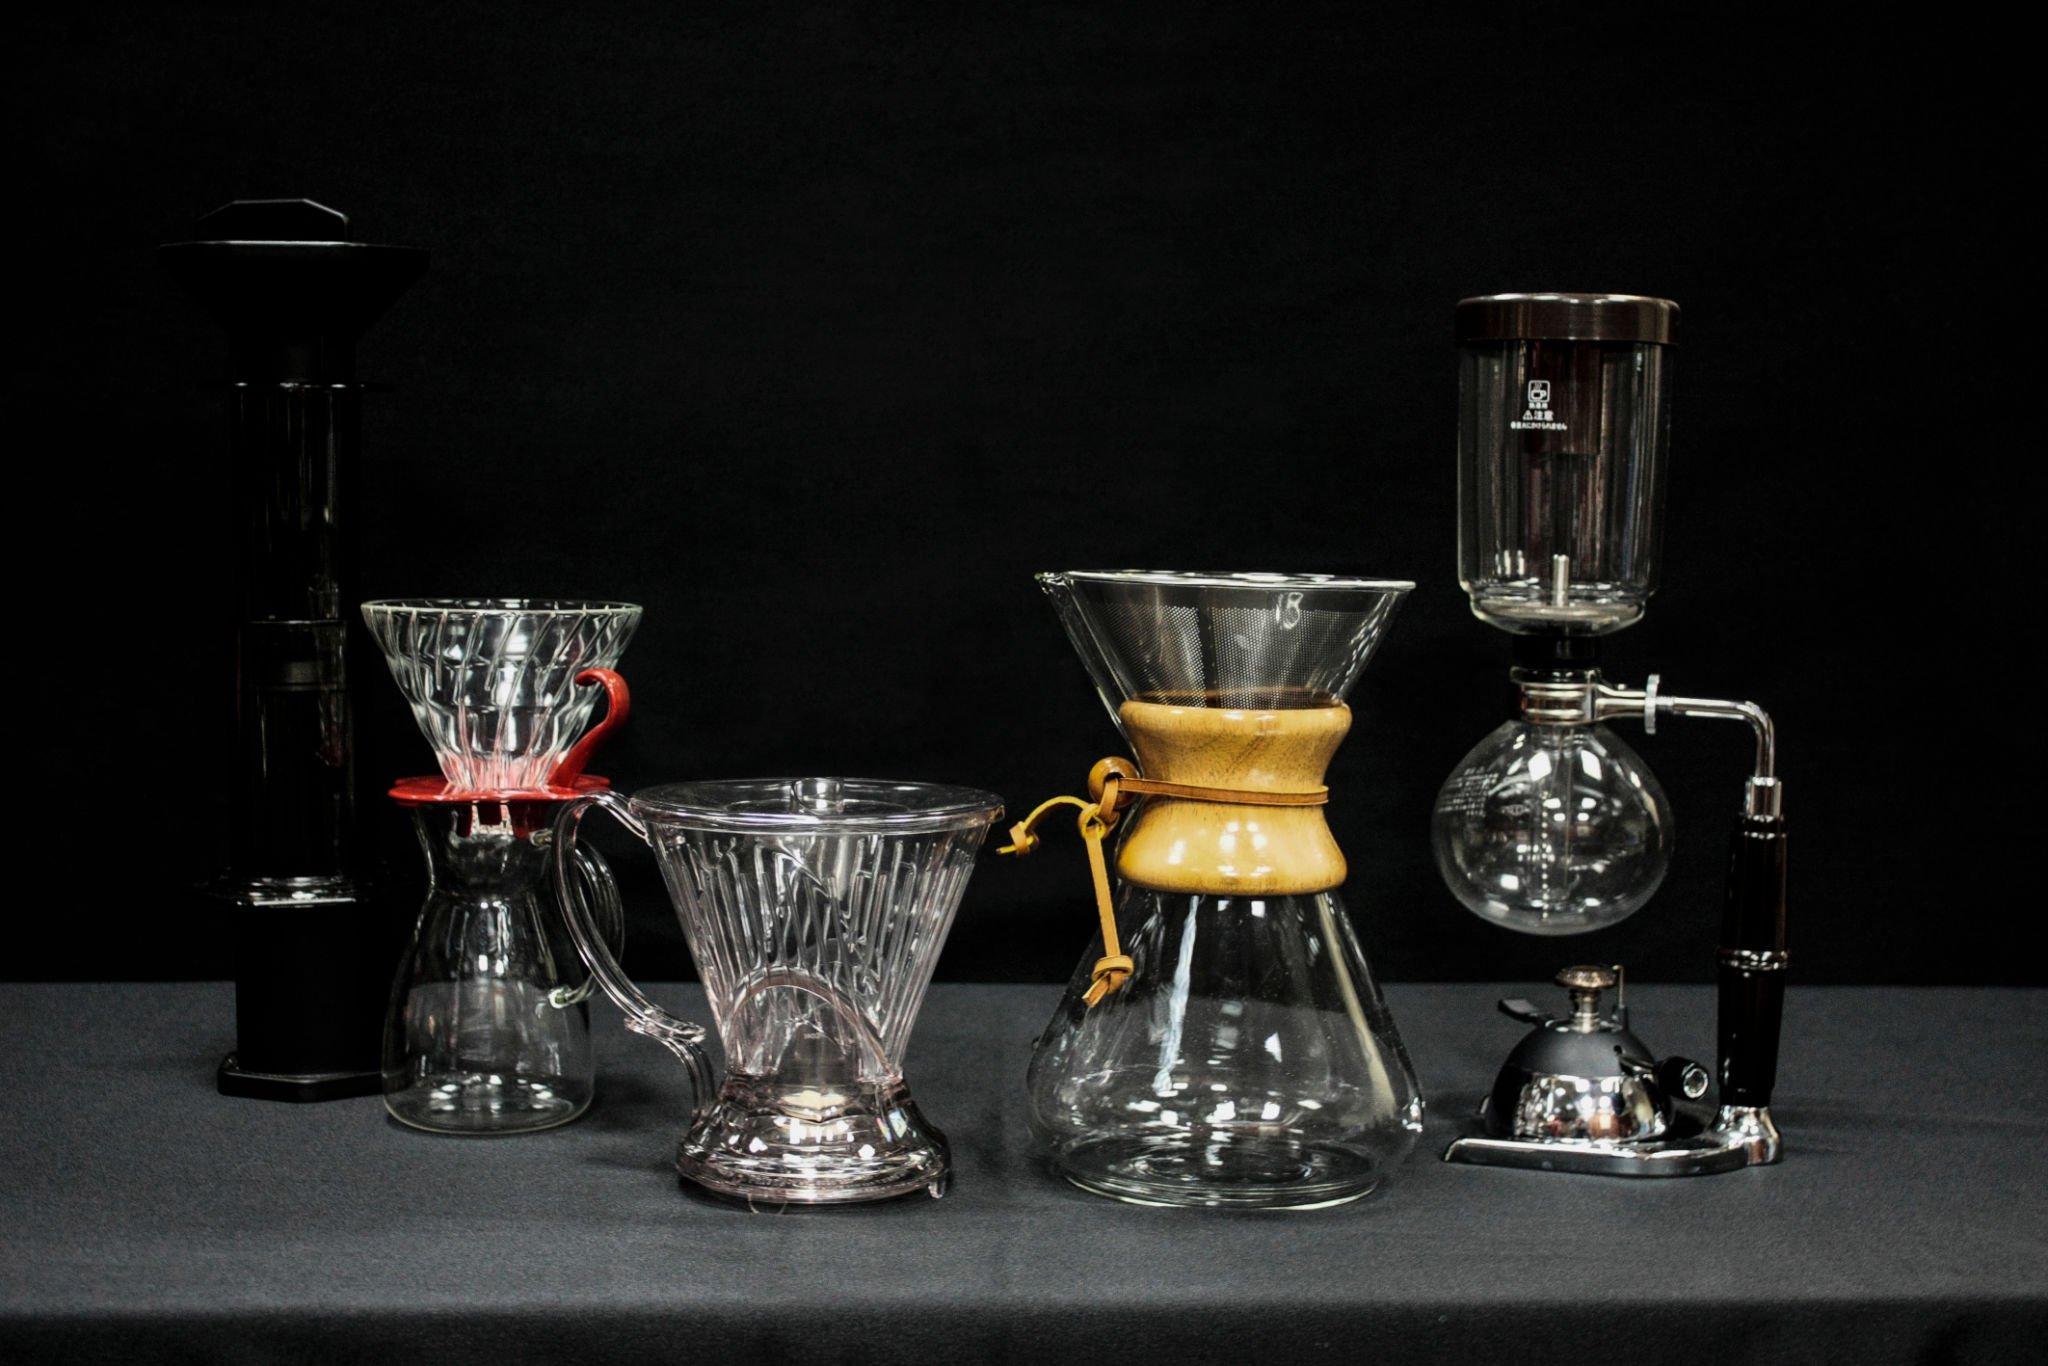 Which Coffee Maker Is Best: V60 or Chemex? Compare & Decide.